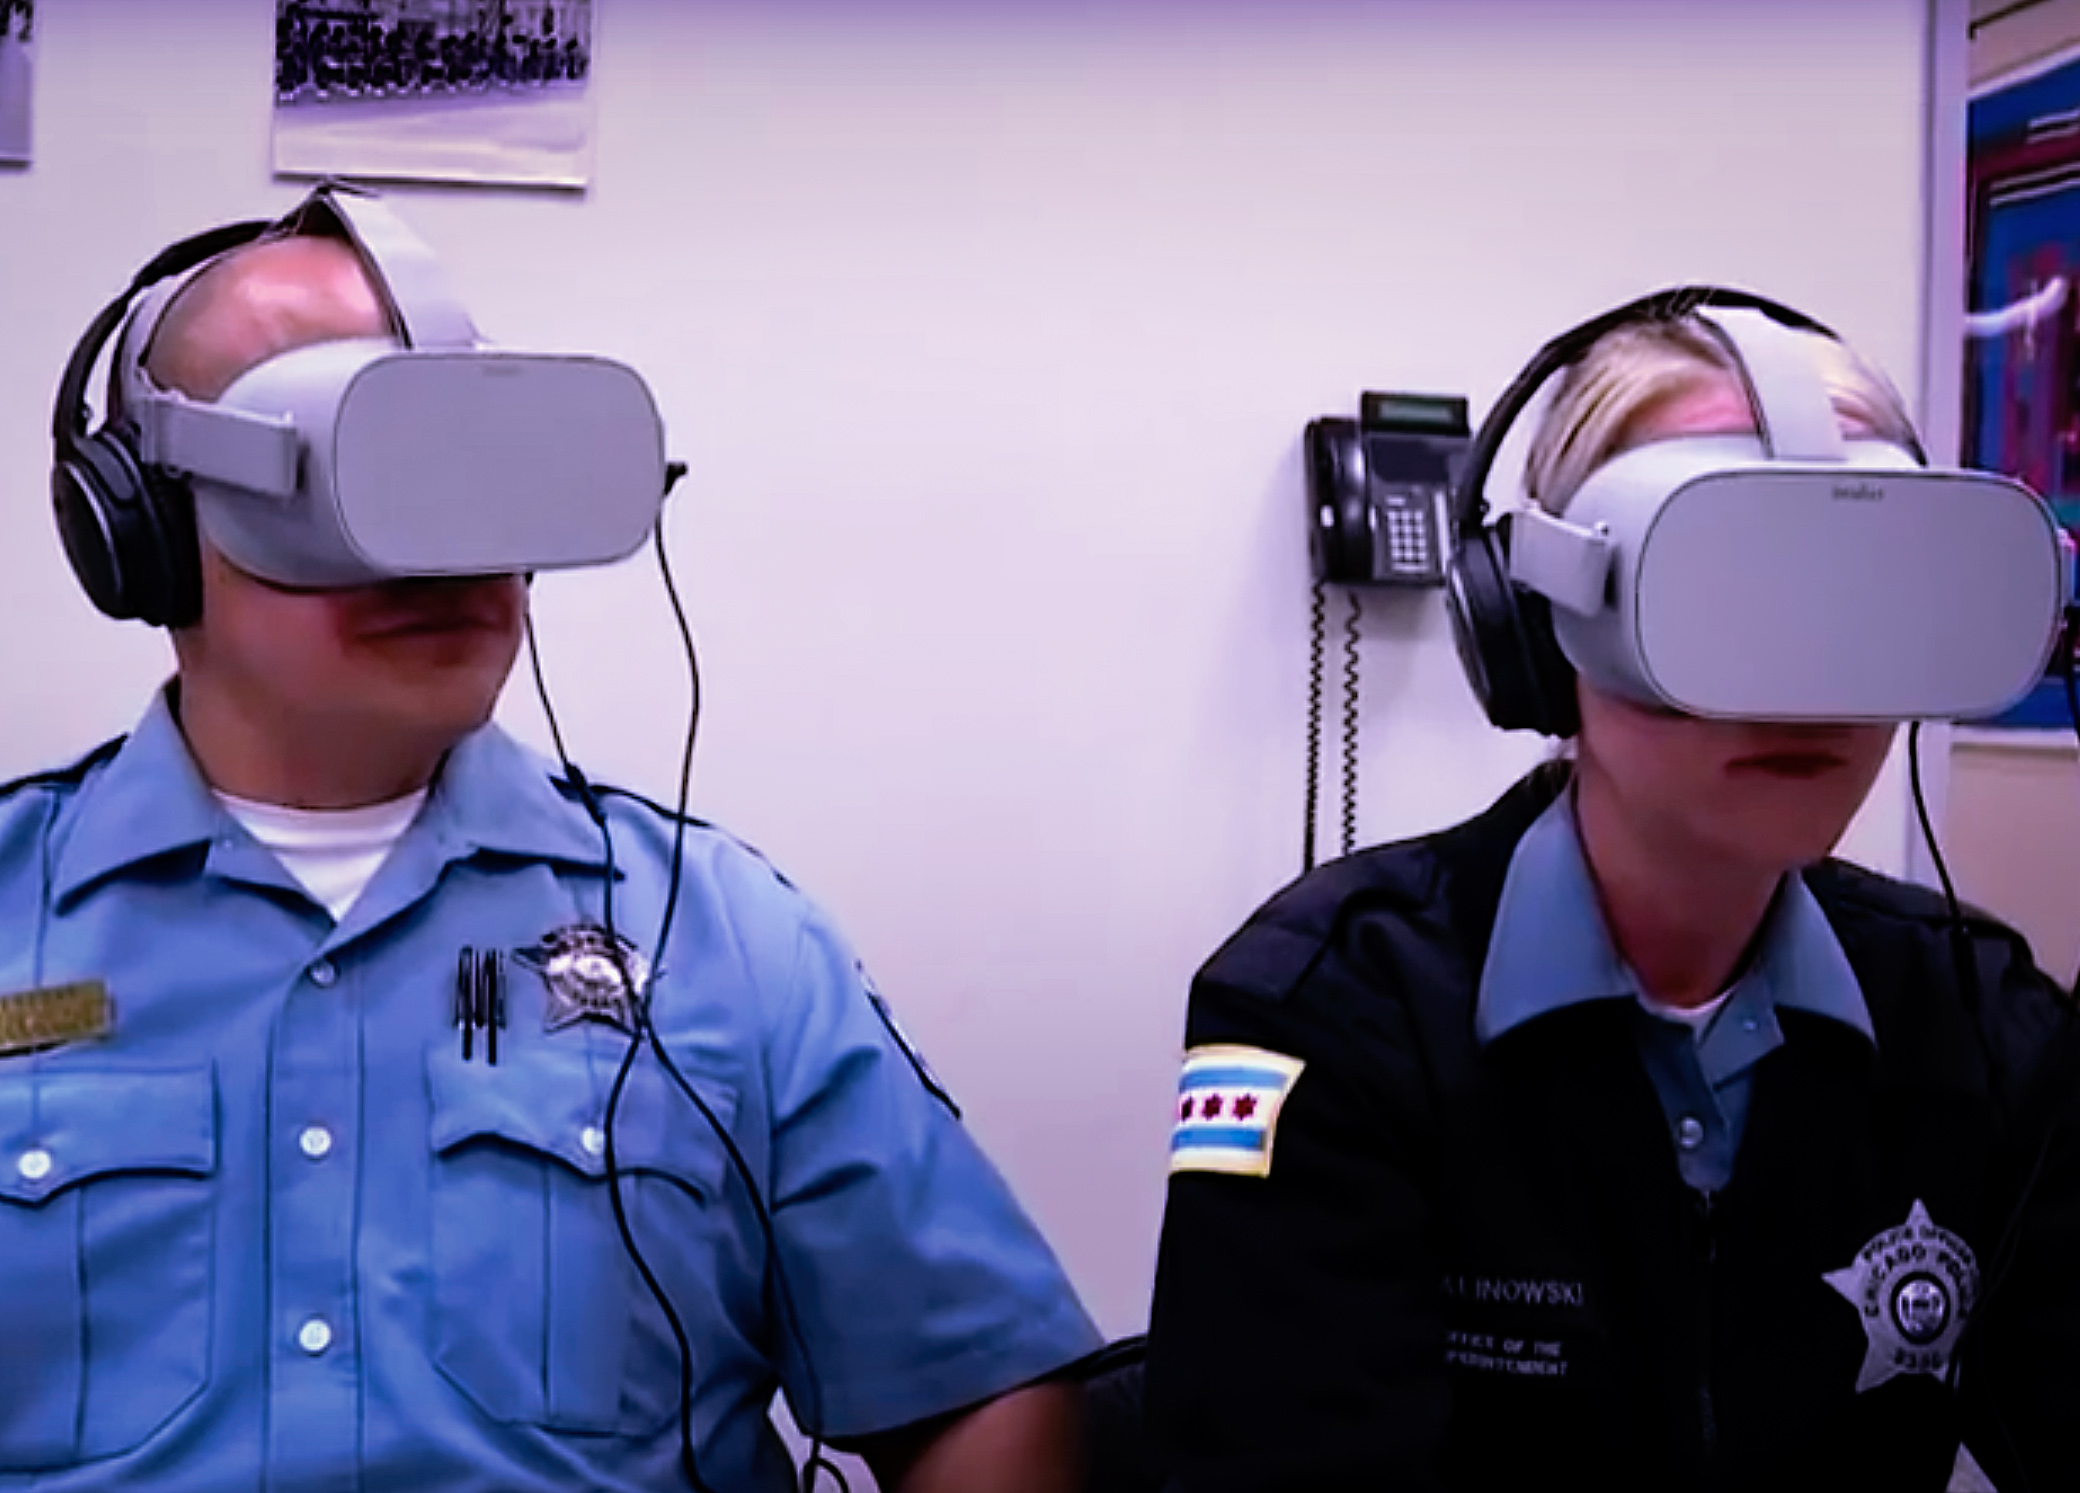 Police using VR headset